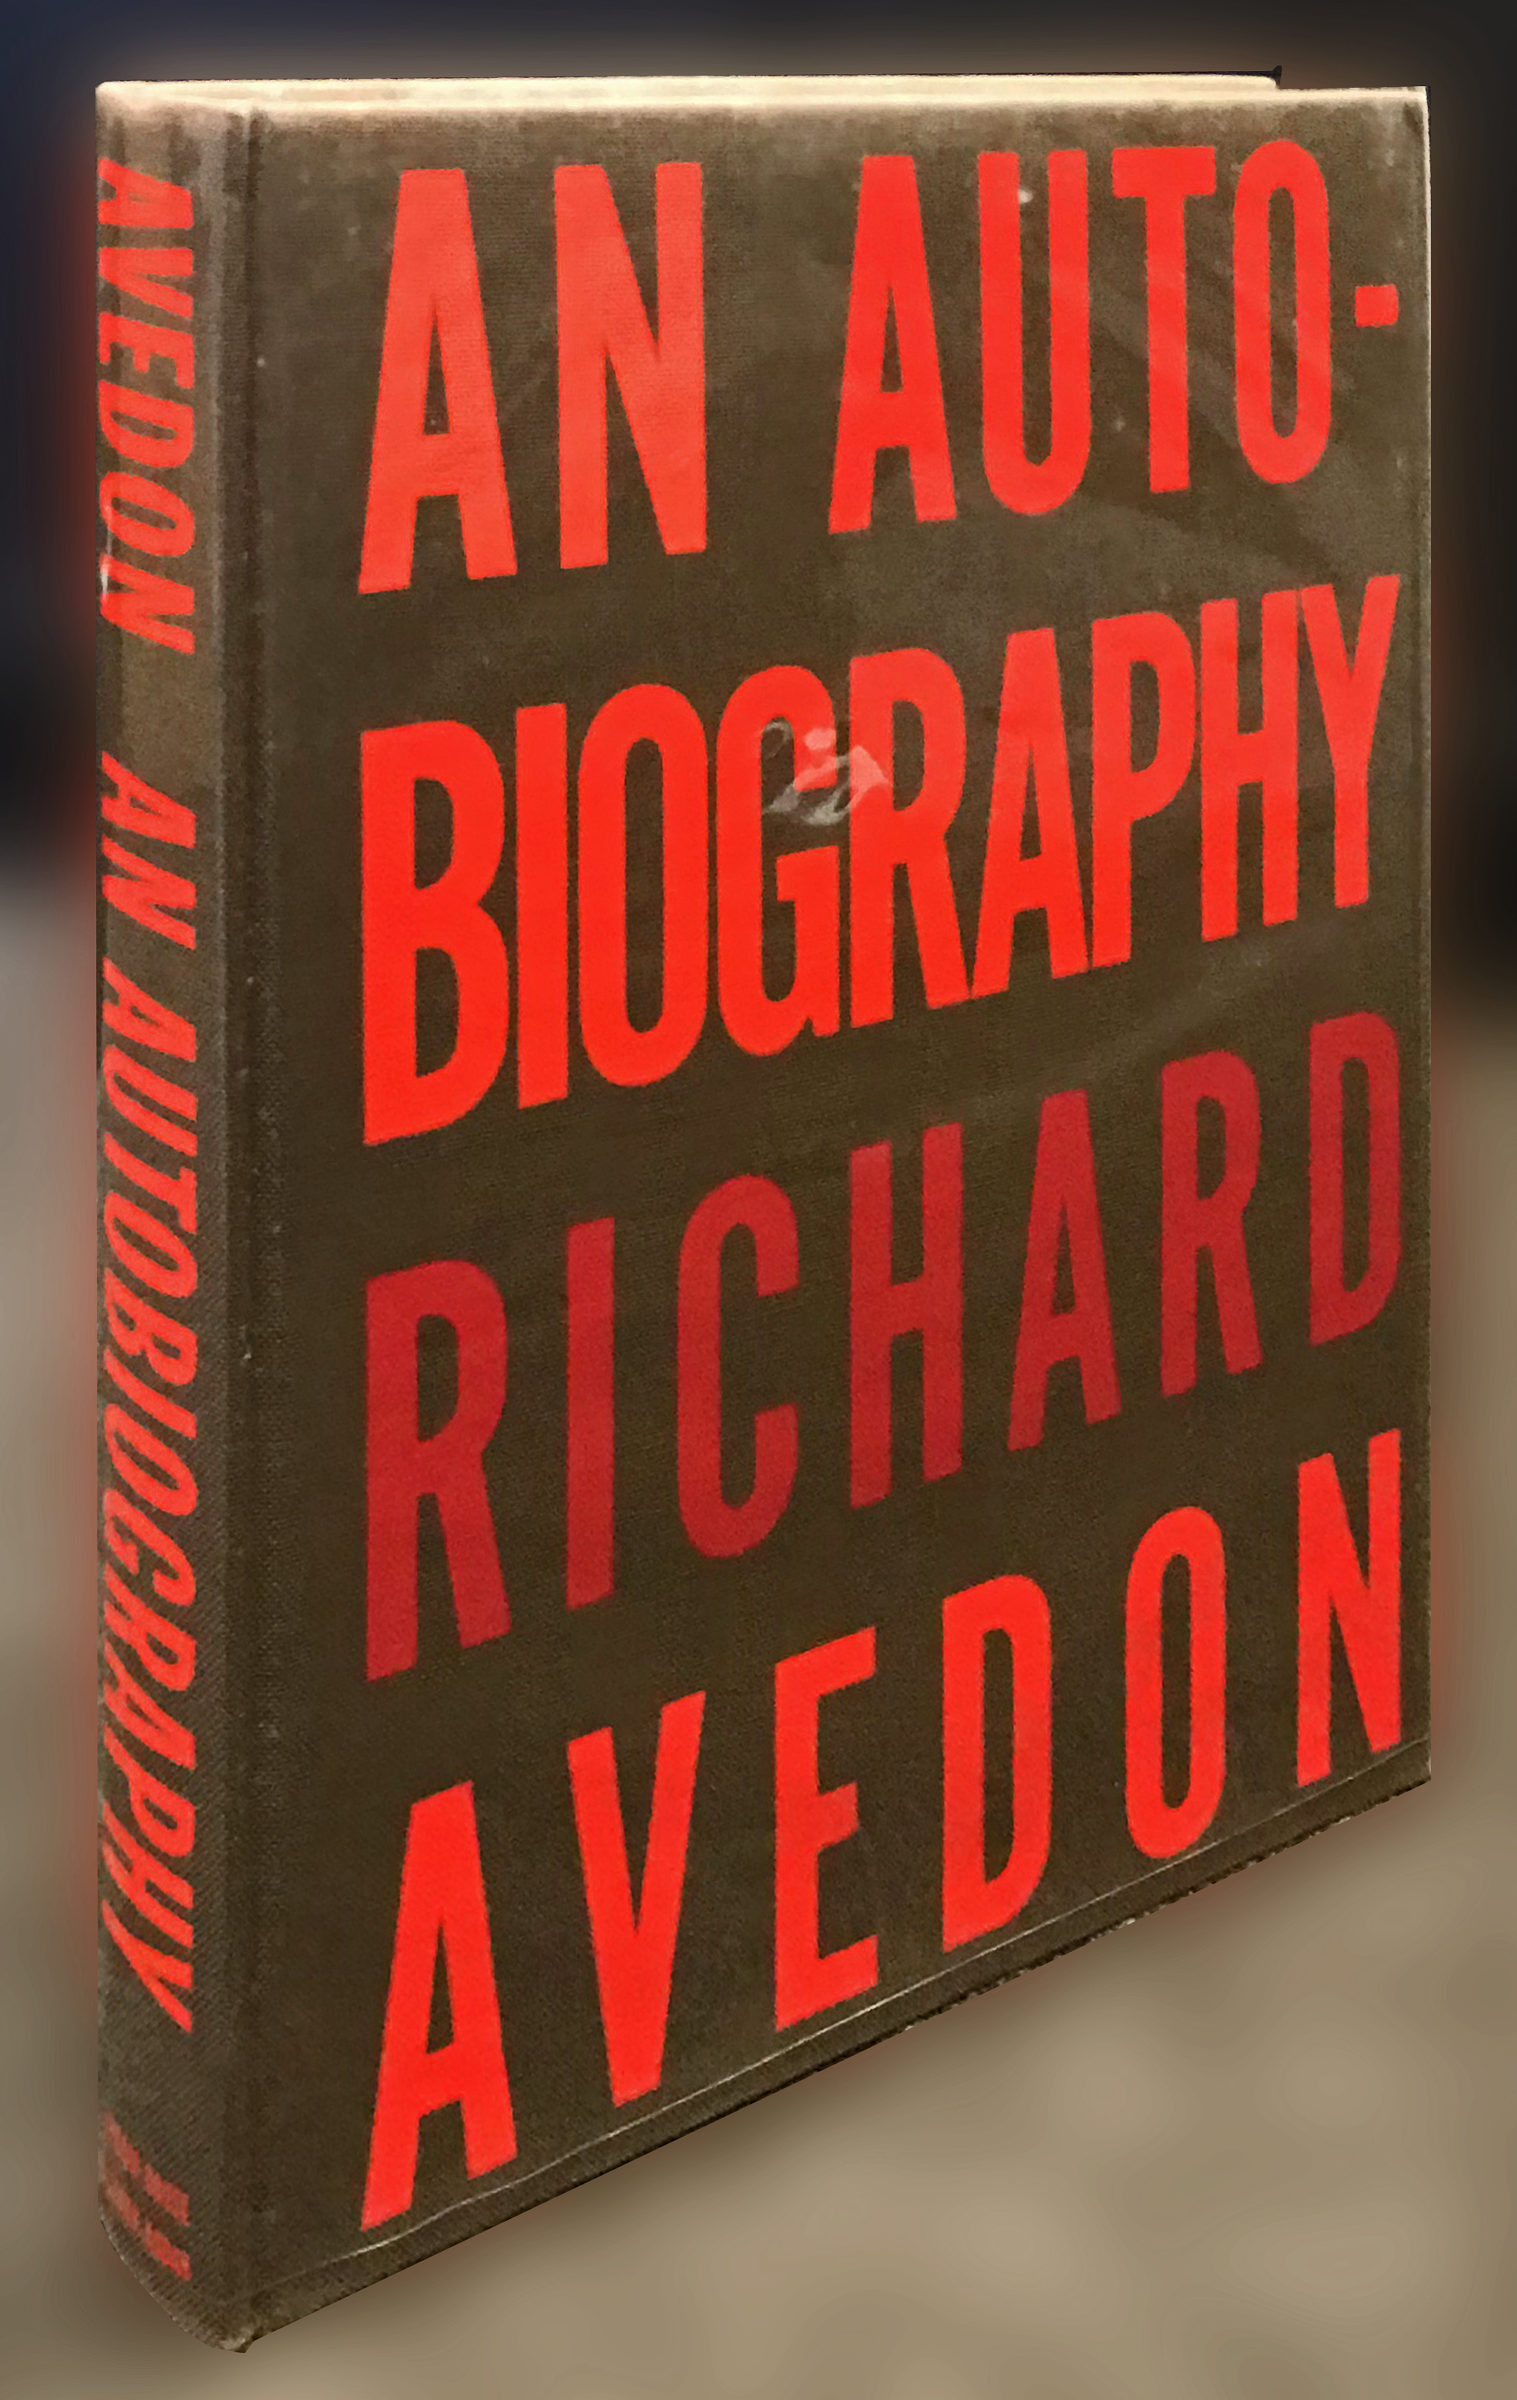 Signed First Edition of “An Autobiography” in Mint Condition